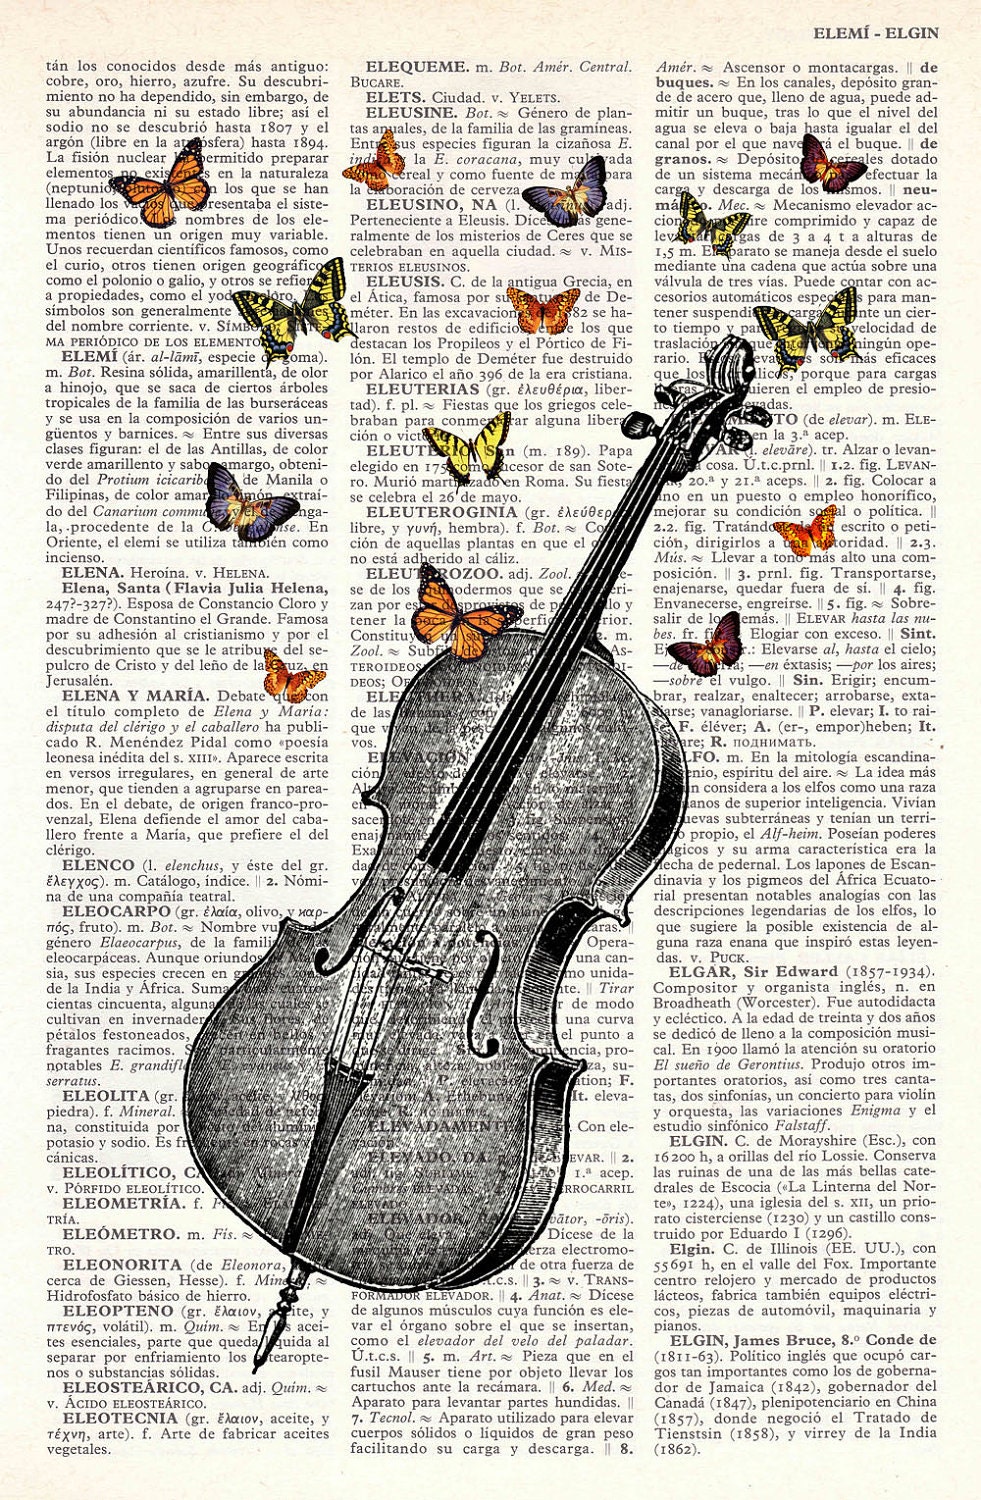 Butterfly collage Vintage Book Print Butterflies over cello collage Print on Vintage Dictionary  art